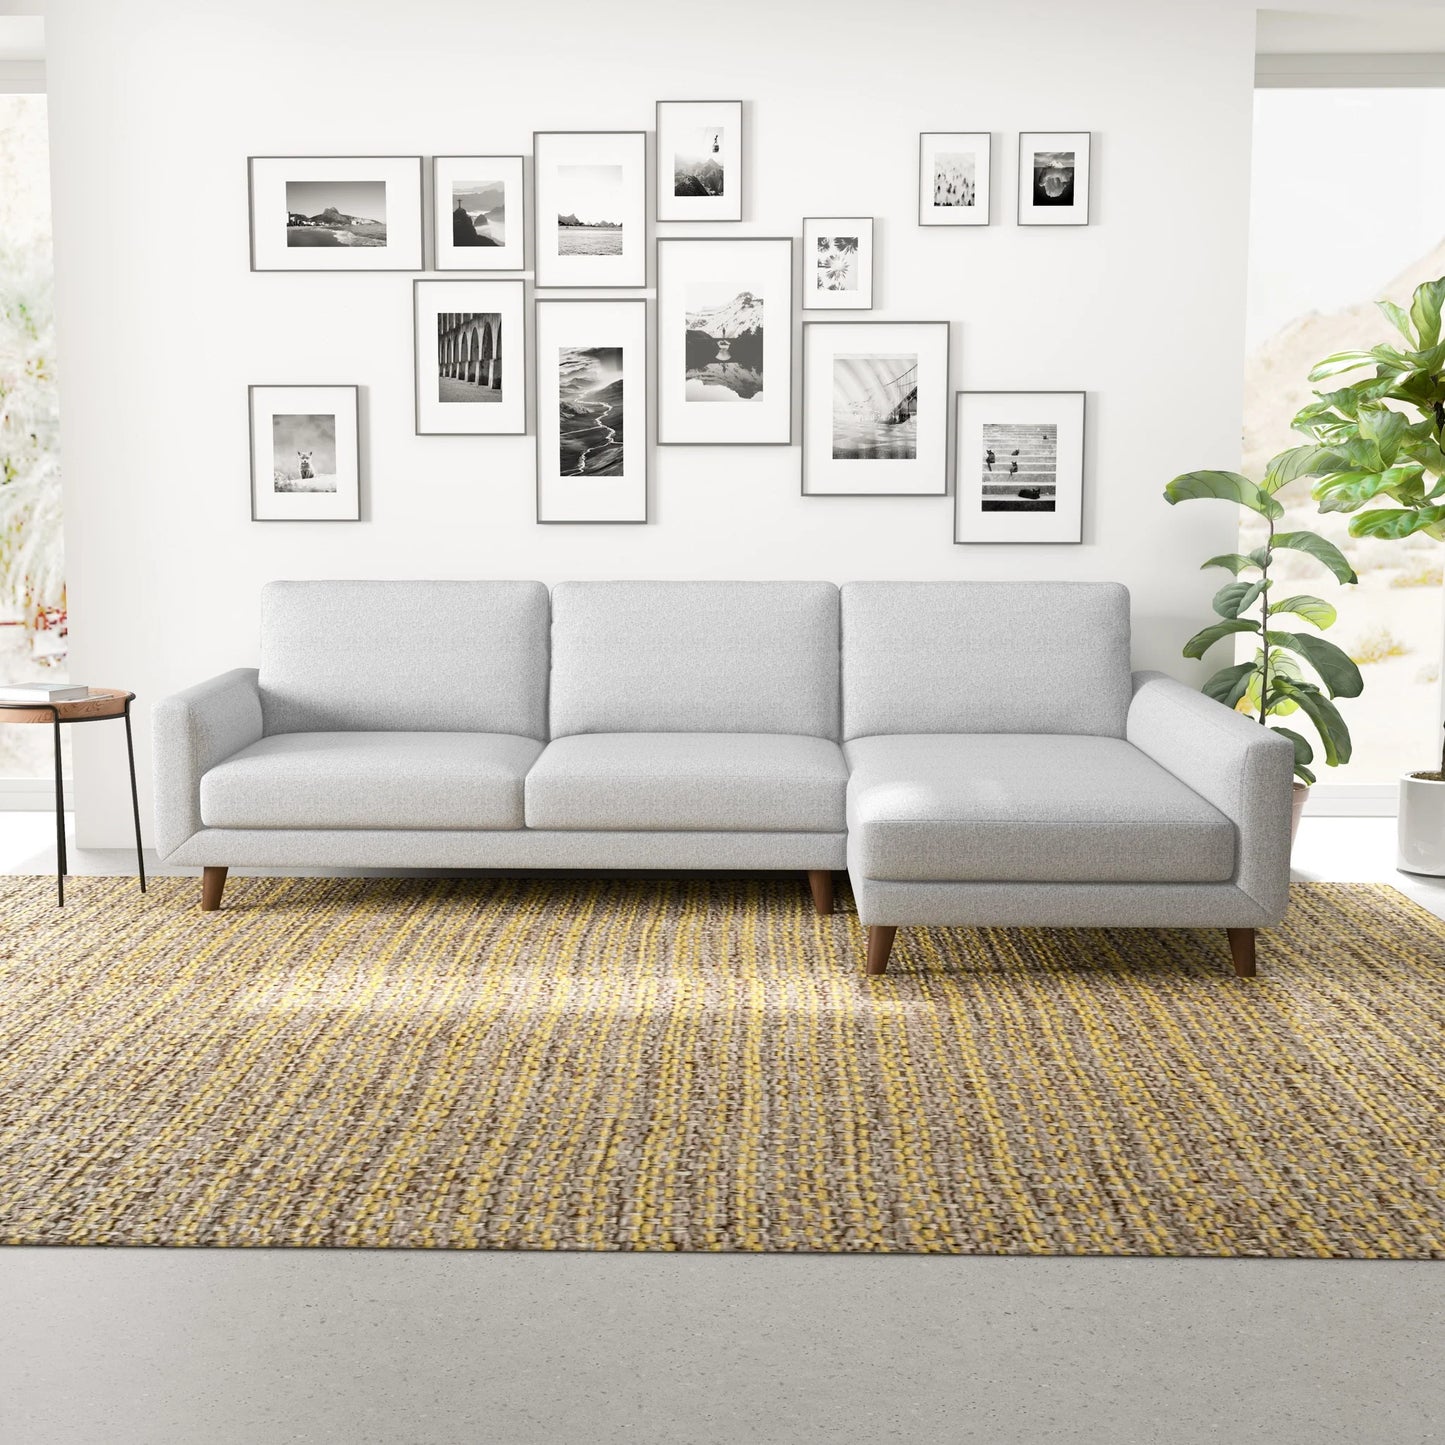 Bellaire Sectional Sofa (Light Gray - Right Facing Chaise)